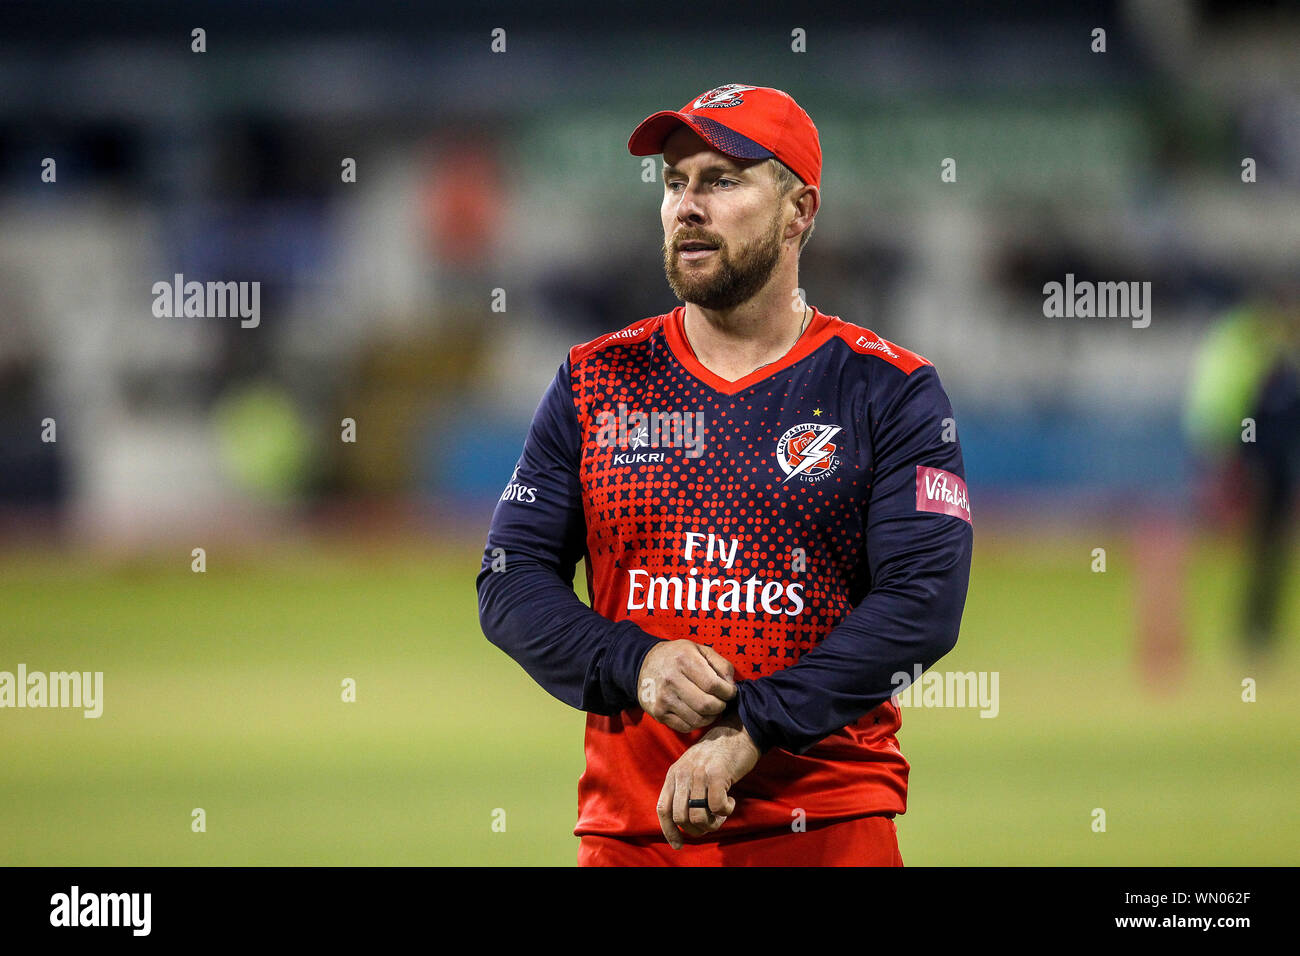 CHESTER LE STREET, ENGLAND SEPT 4TH Steven Croft of Lancashire Lightning  during the Vitality Blast T20 match between Lancashire and Essex at Emirates Riverside, Chester le Street on Wednesday 4th September 2019. (Credit: Mark Fletcher | MI News) Stock Photo